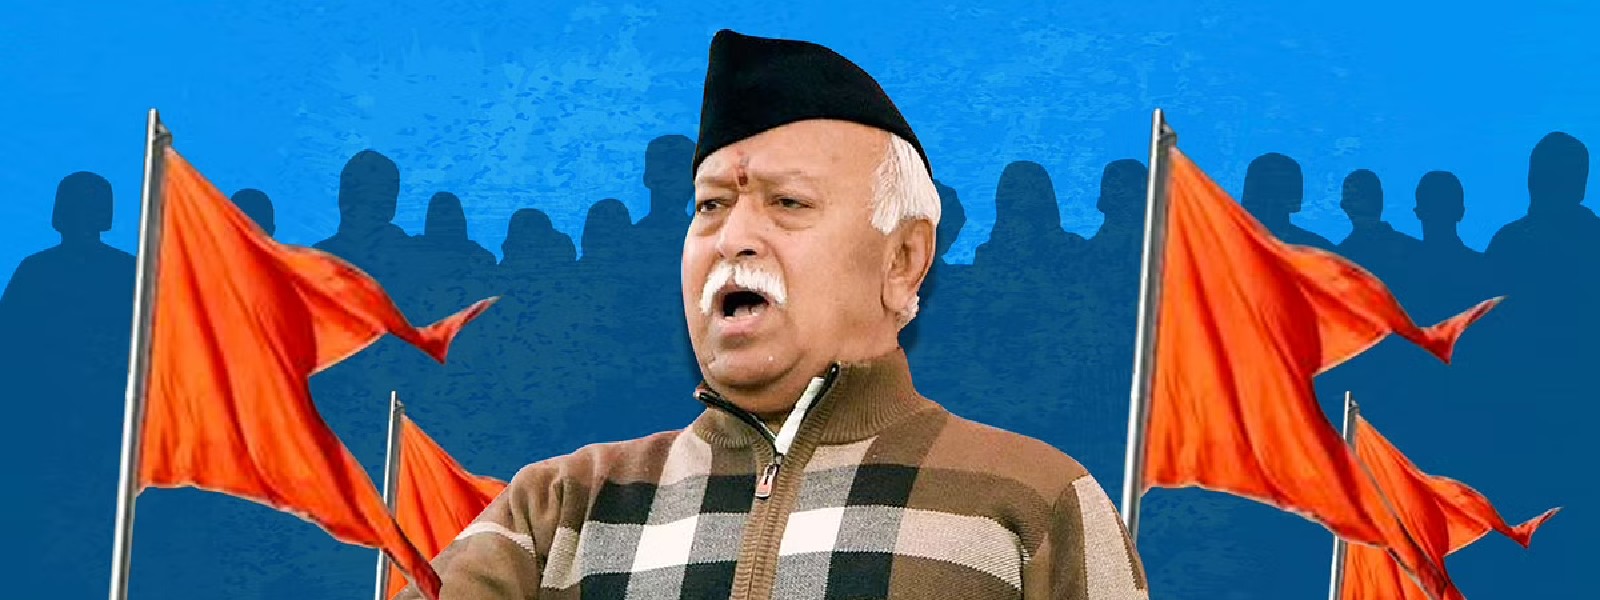 Only India helped Sri Lanka when it faced crisis, others looked for business: Bhagwat